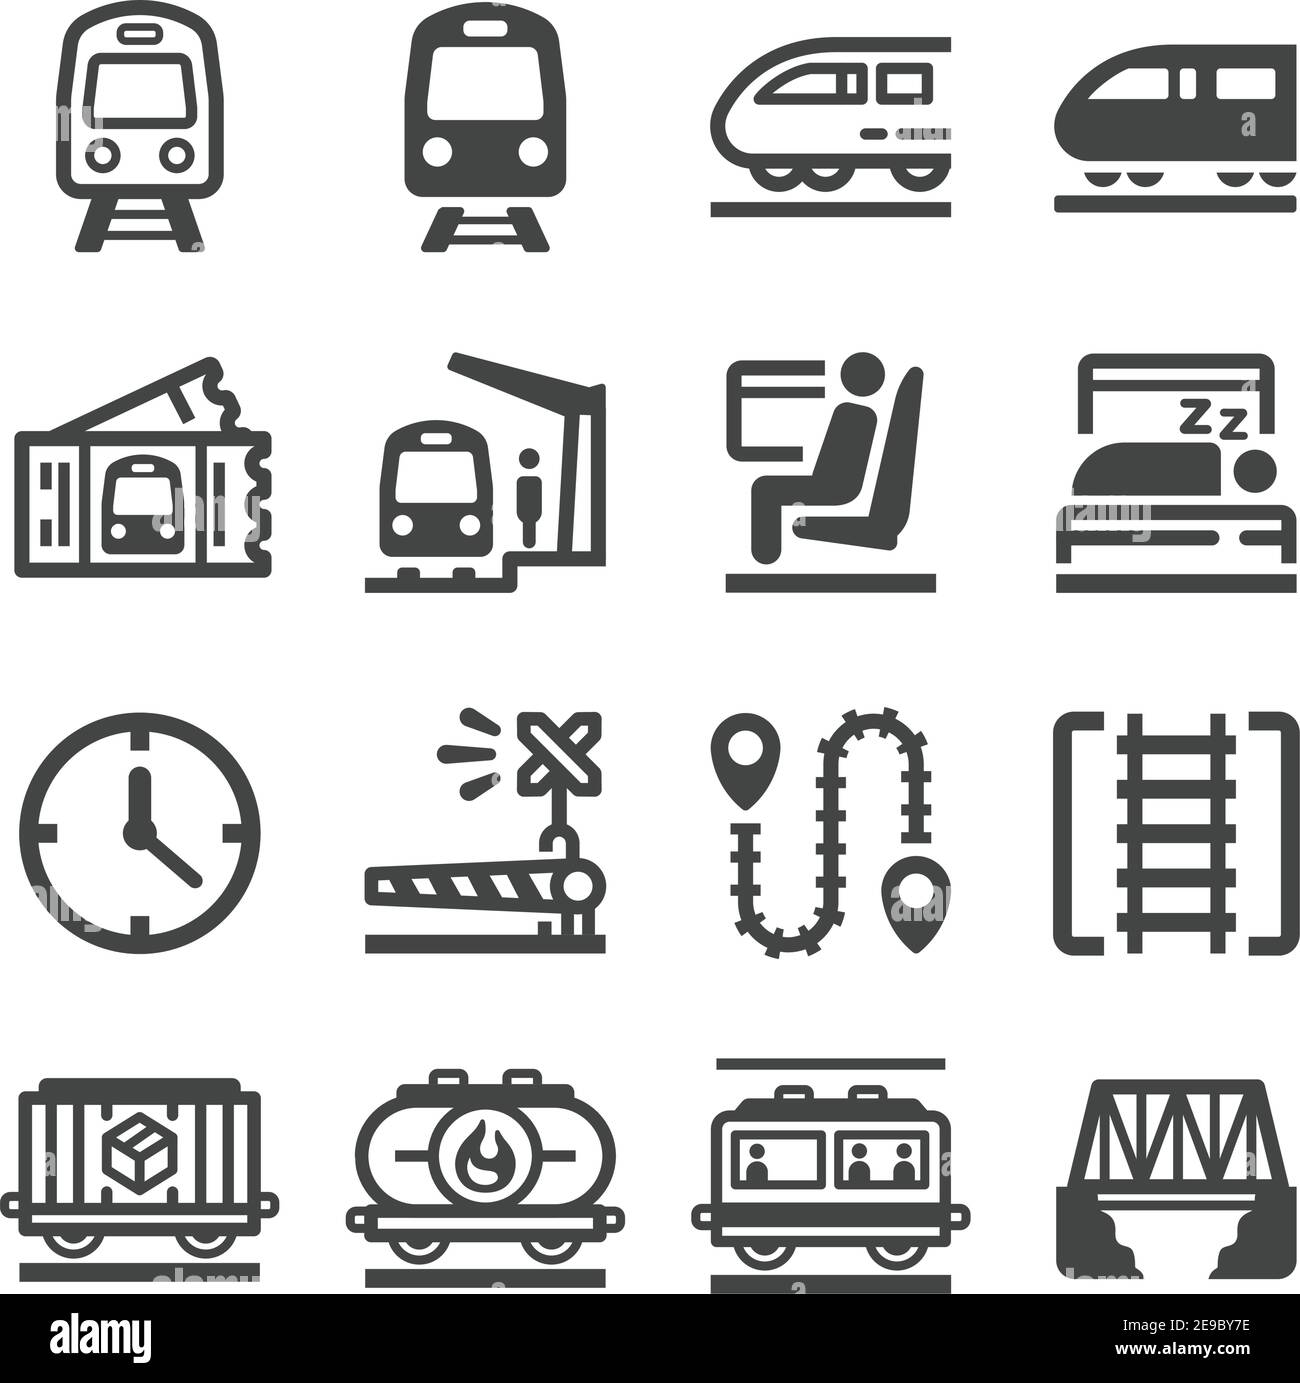 train icon set,vector and illustration Stock Vector